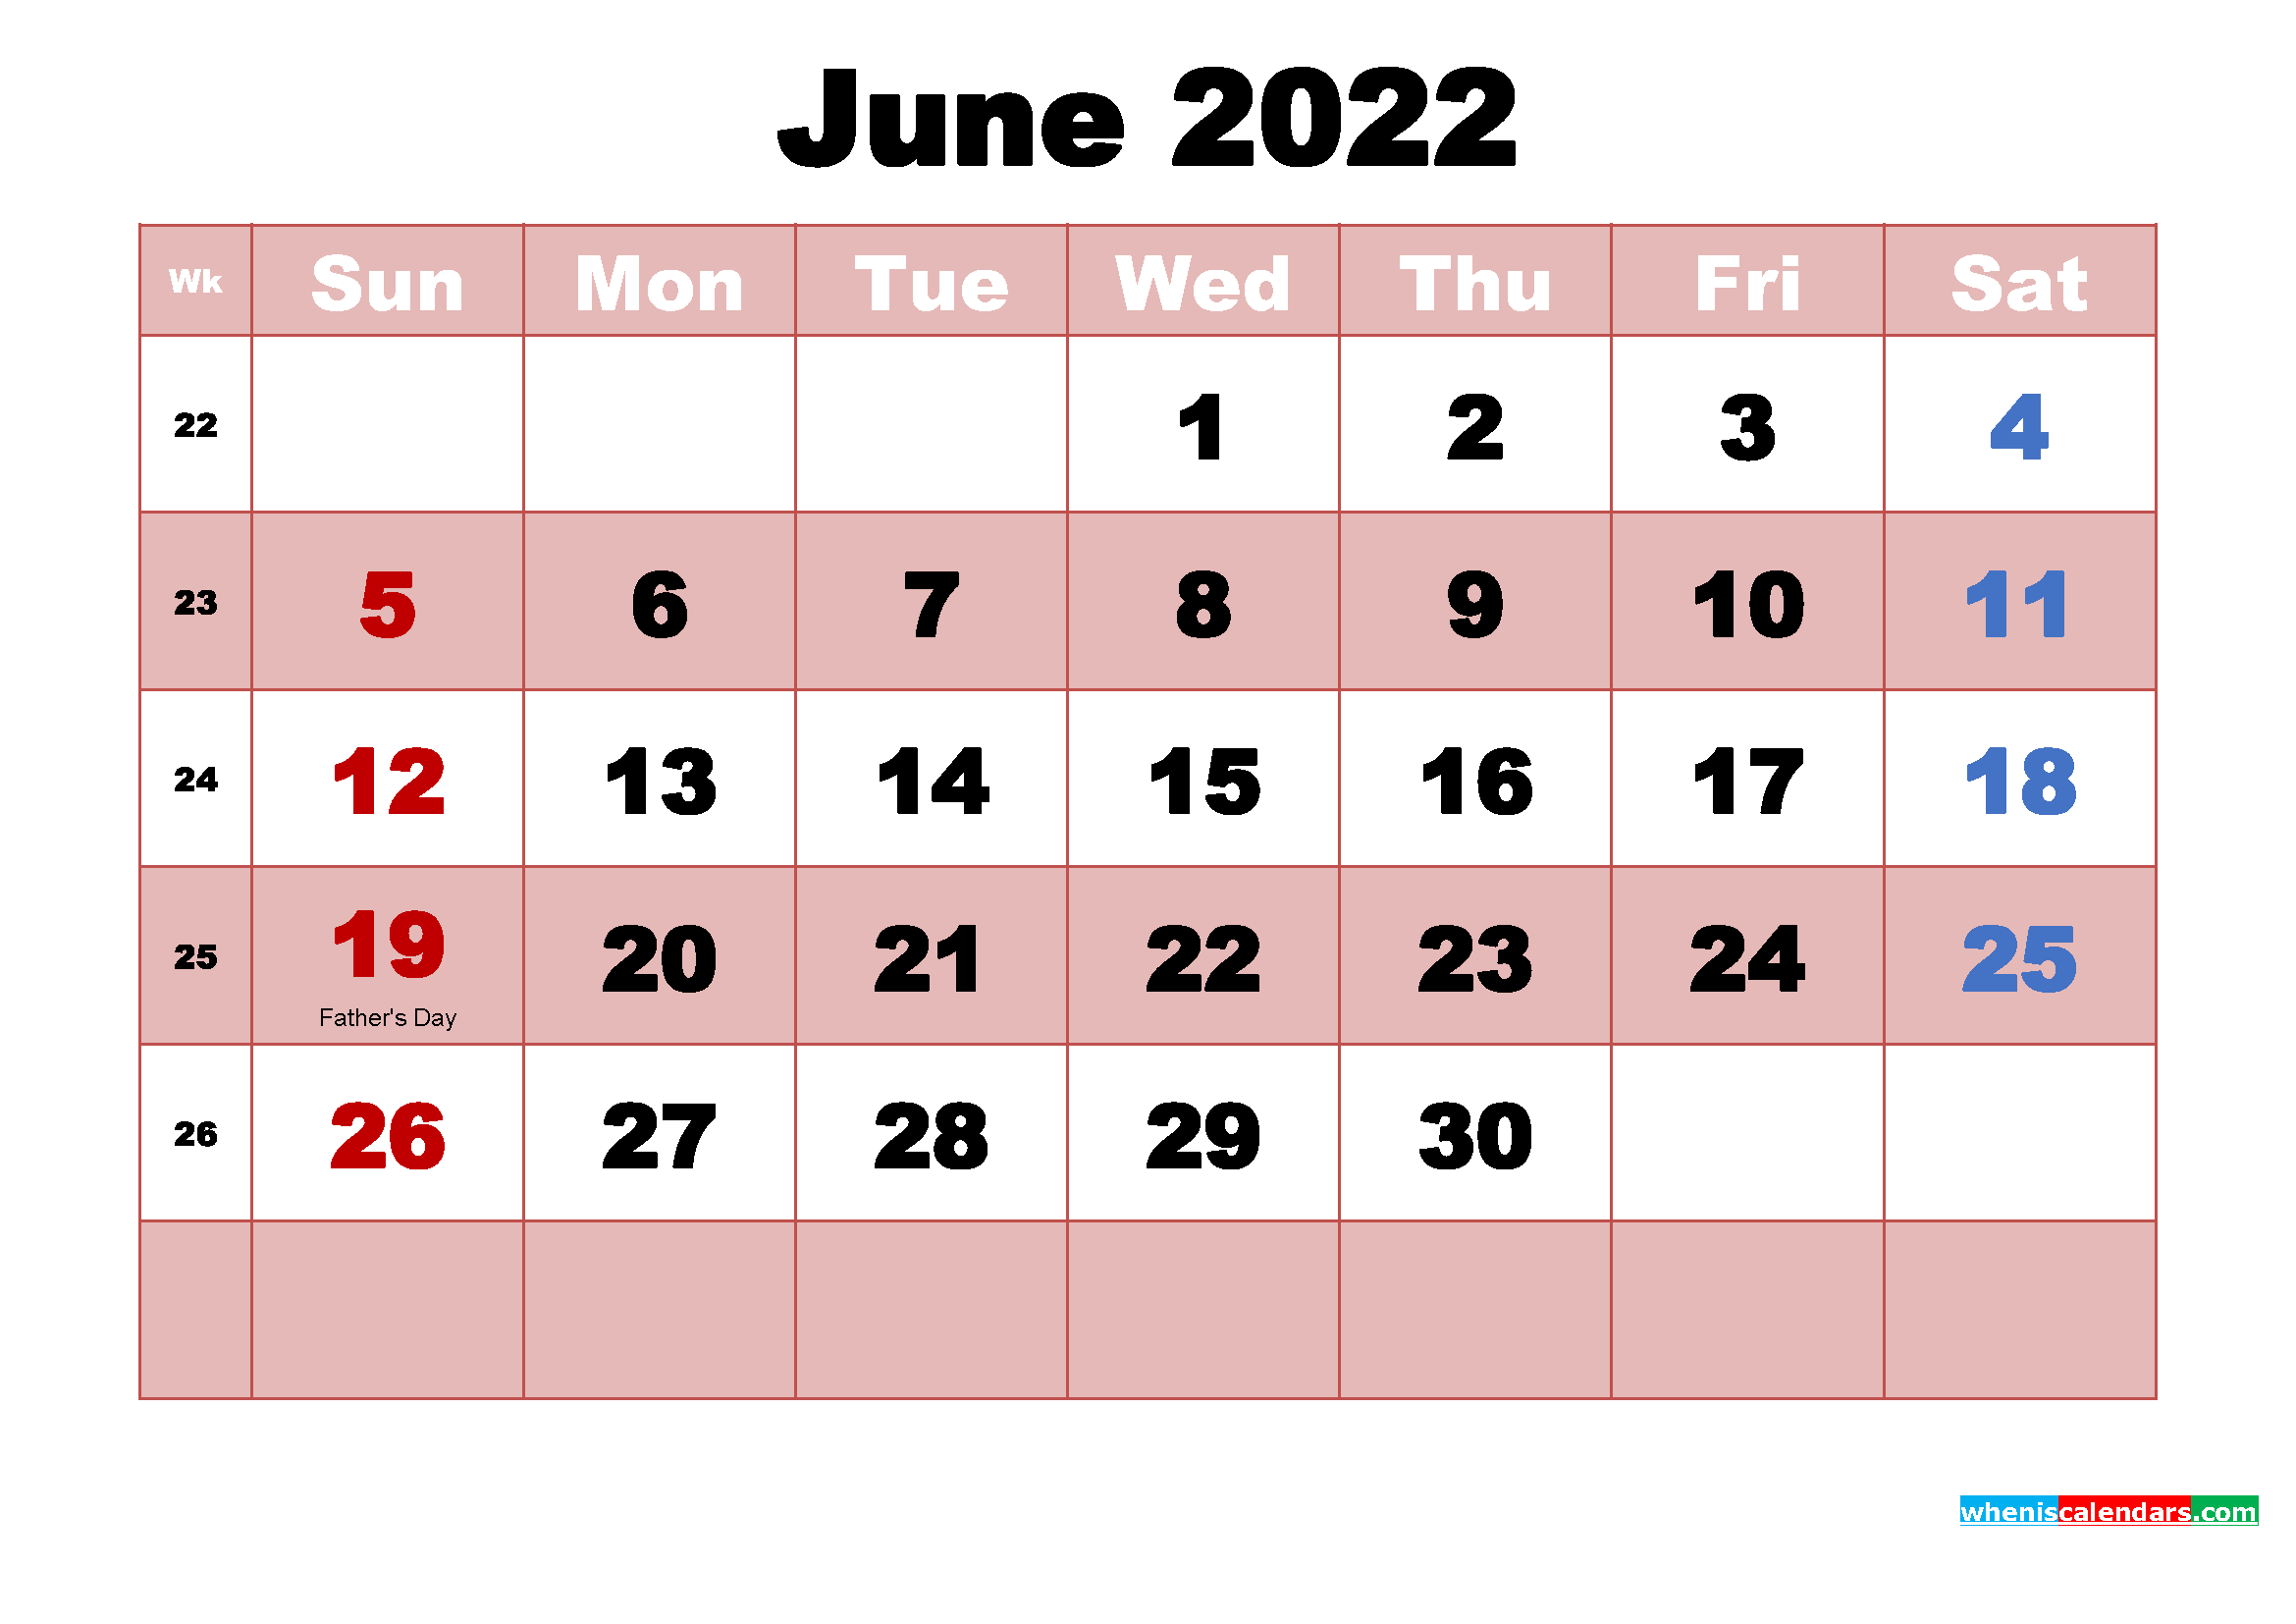 June 2022 Calendar With Holidays Wallpapers